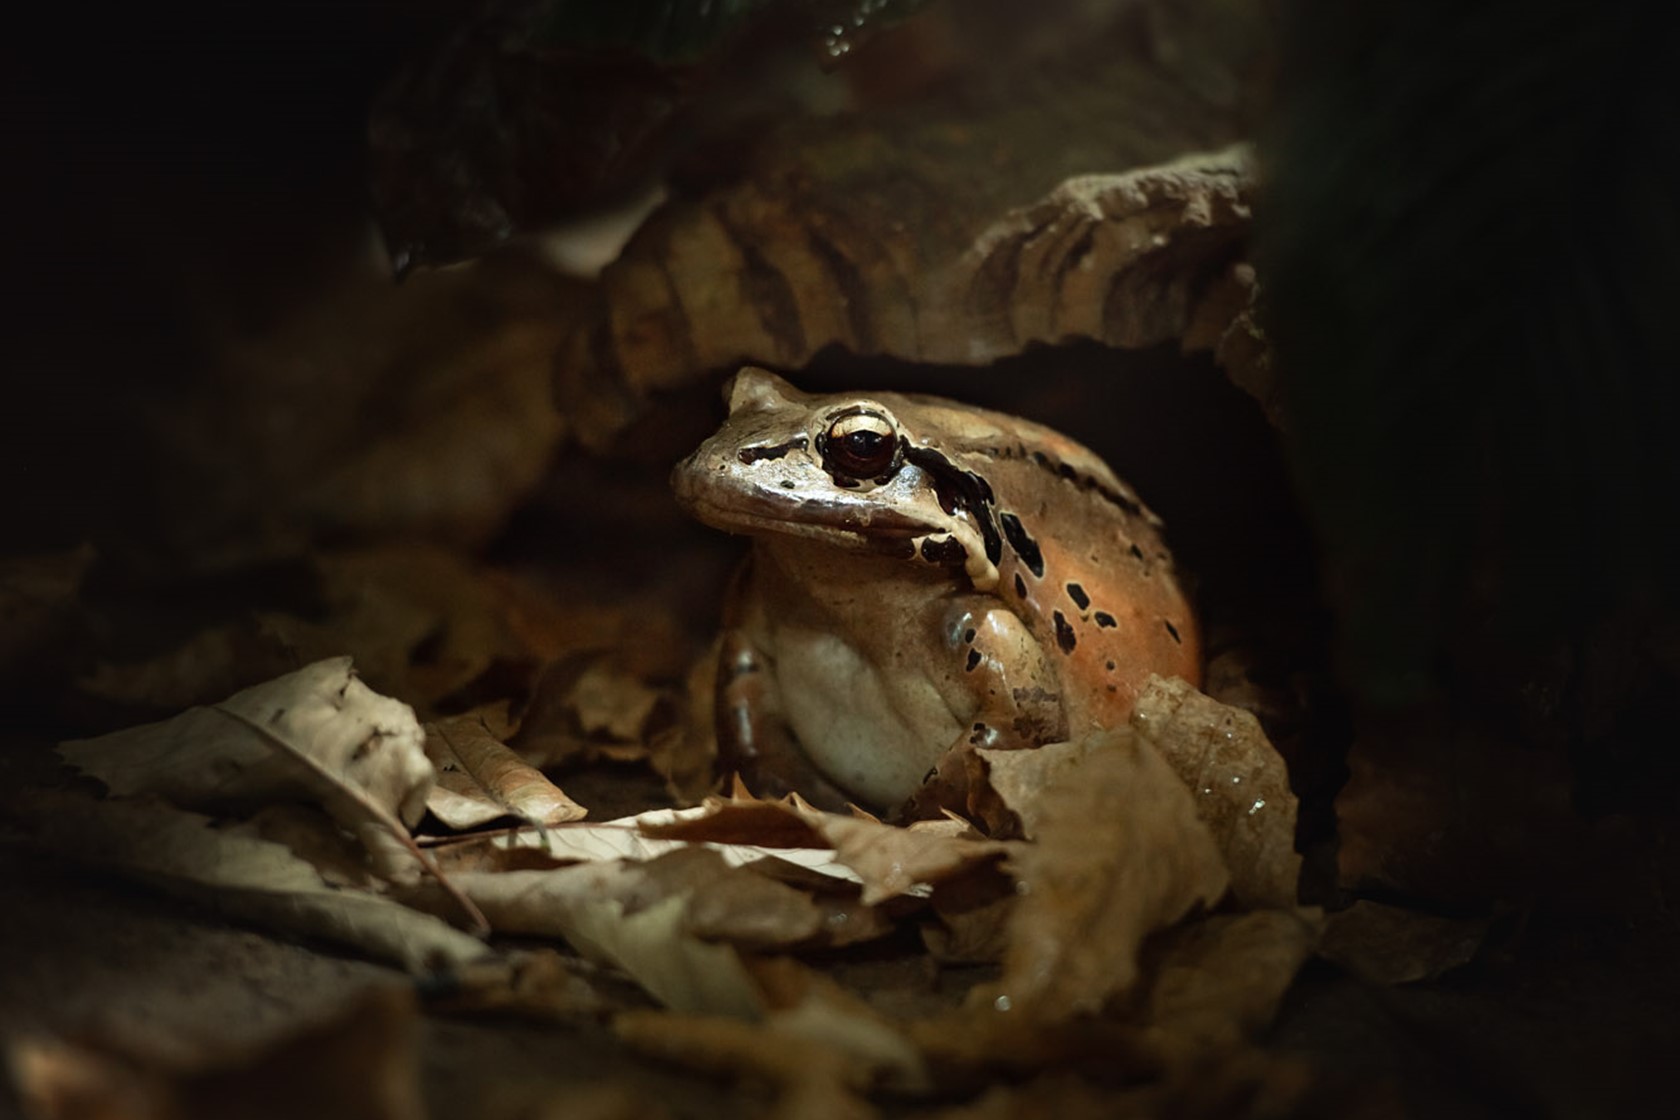 Mountain chicken frog at Jersey Zoo